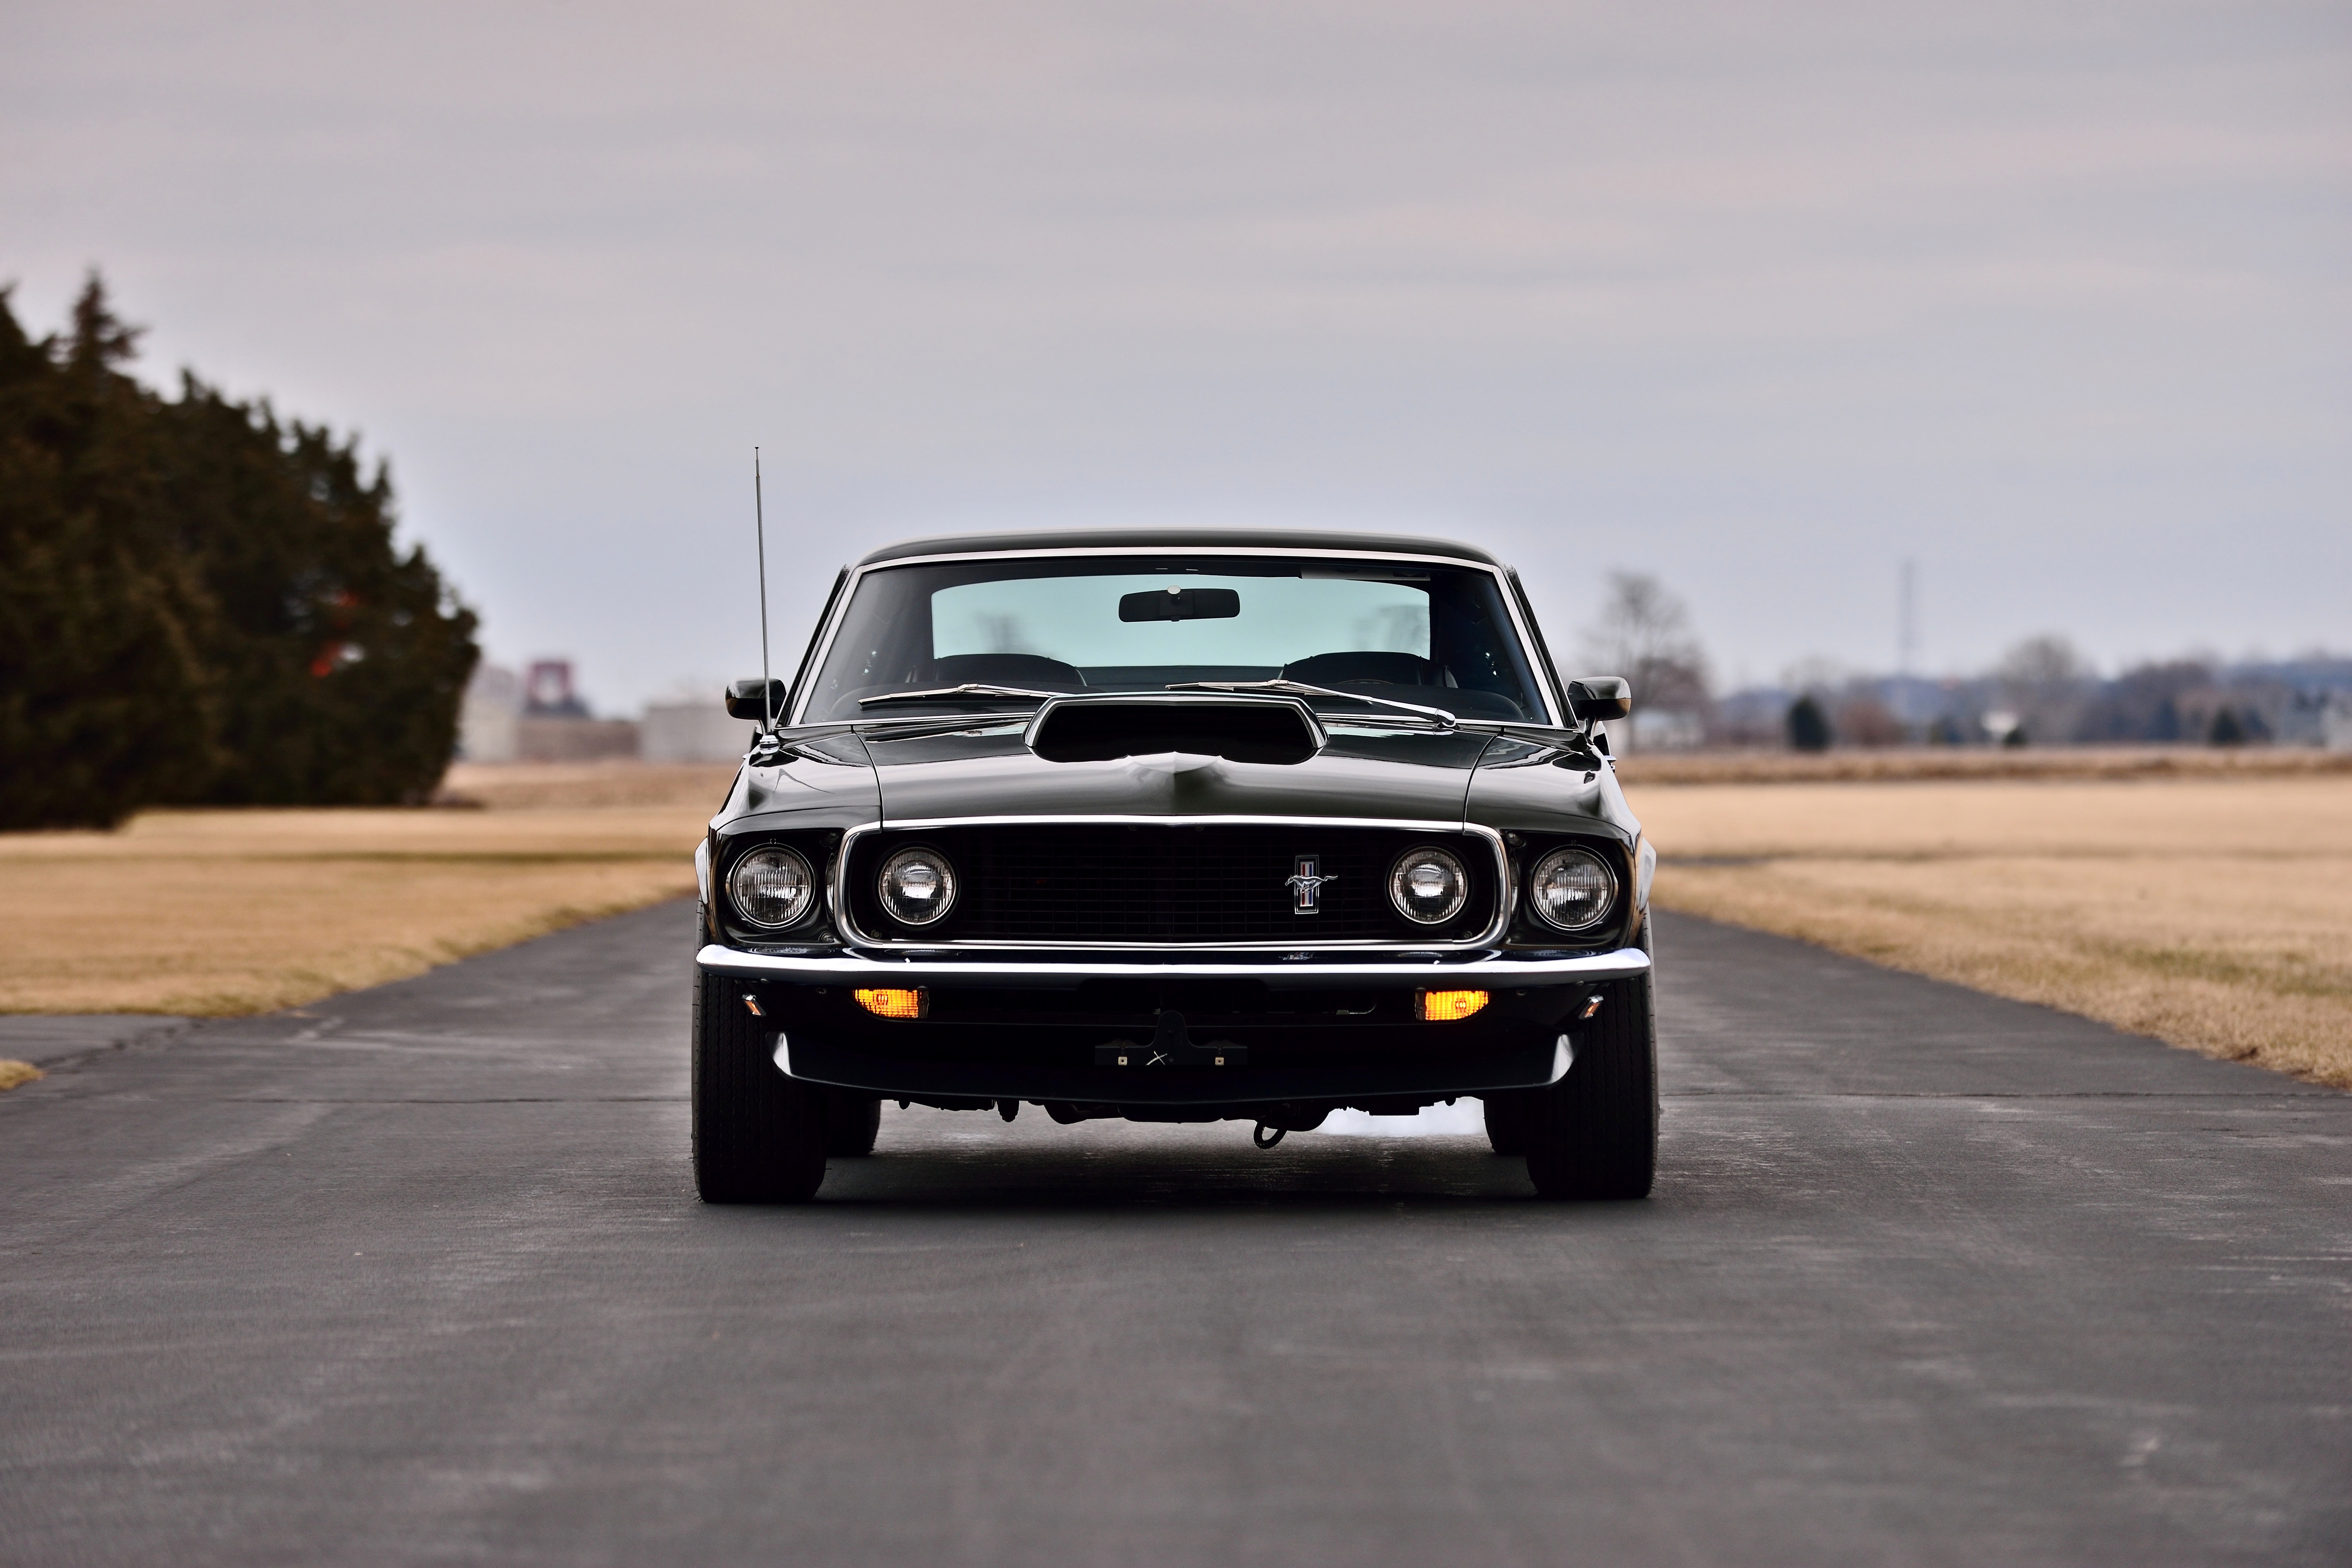 Ford Mustang Boss 429 Wallpapers